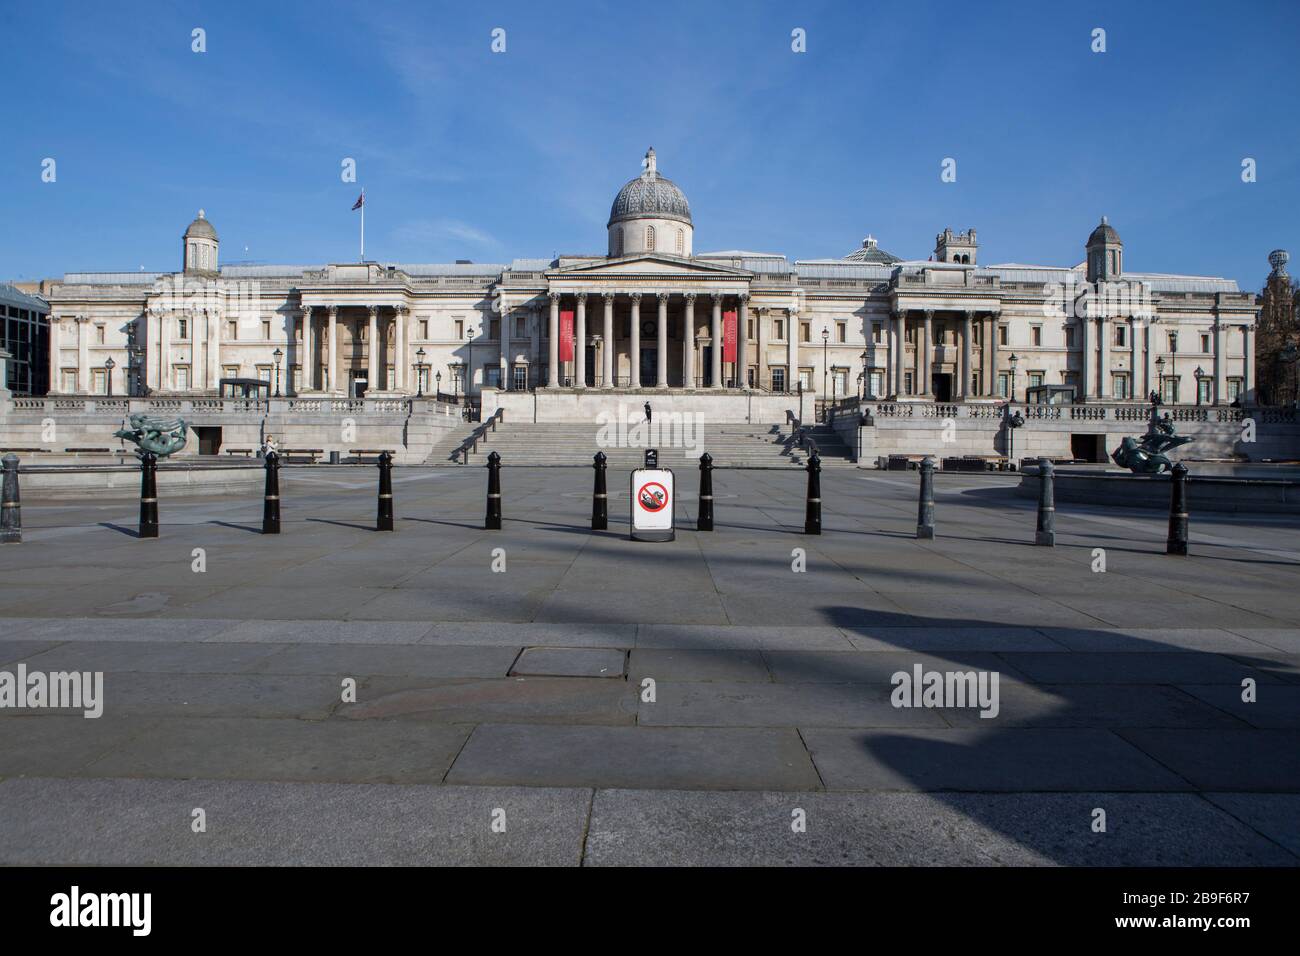 London, UK. 24th Mar, 2020. In an attempt to slow the spread of Coronavirus, Prime Minister Boris Johnson orders the UK to 'stay home' leaving usually busy roads and streets in London empty. Credit: Marcin Nowak/Alamy Live News Stock Photo